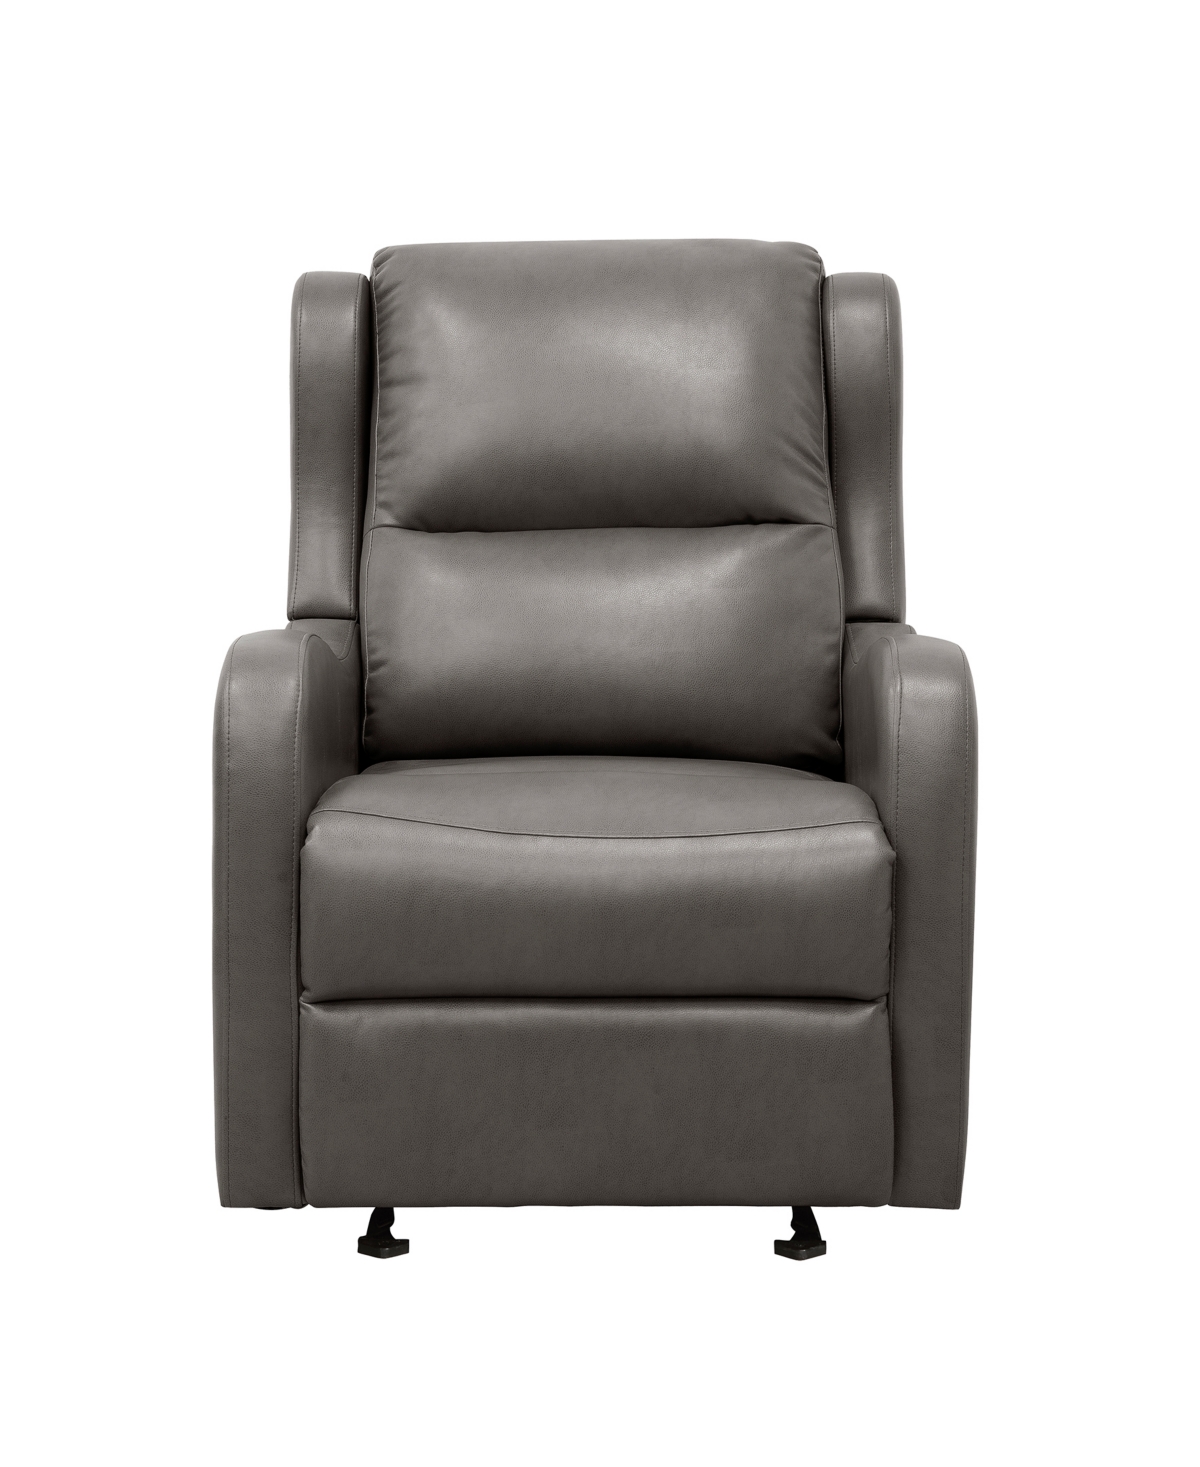 Homelegance White Label Cynthia 30" Glider Manual Recliner In Gray